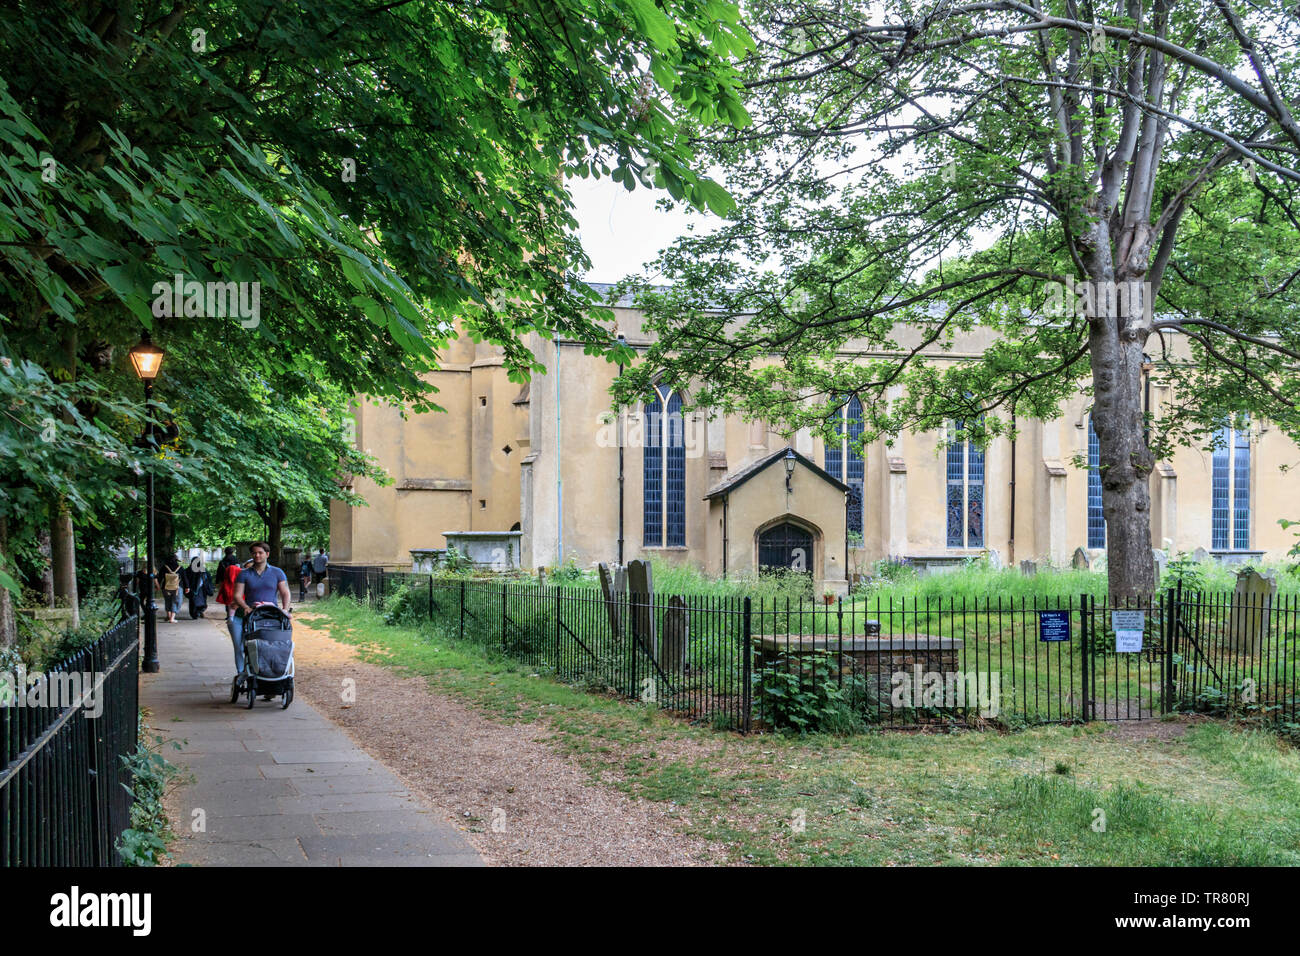 St. Mary’s Church in Church End, Walthamstow Village, a conservation area in Walthamstow, London, UK. Stock Photo